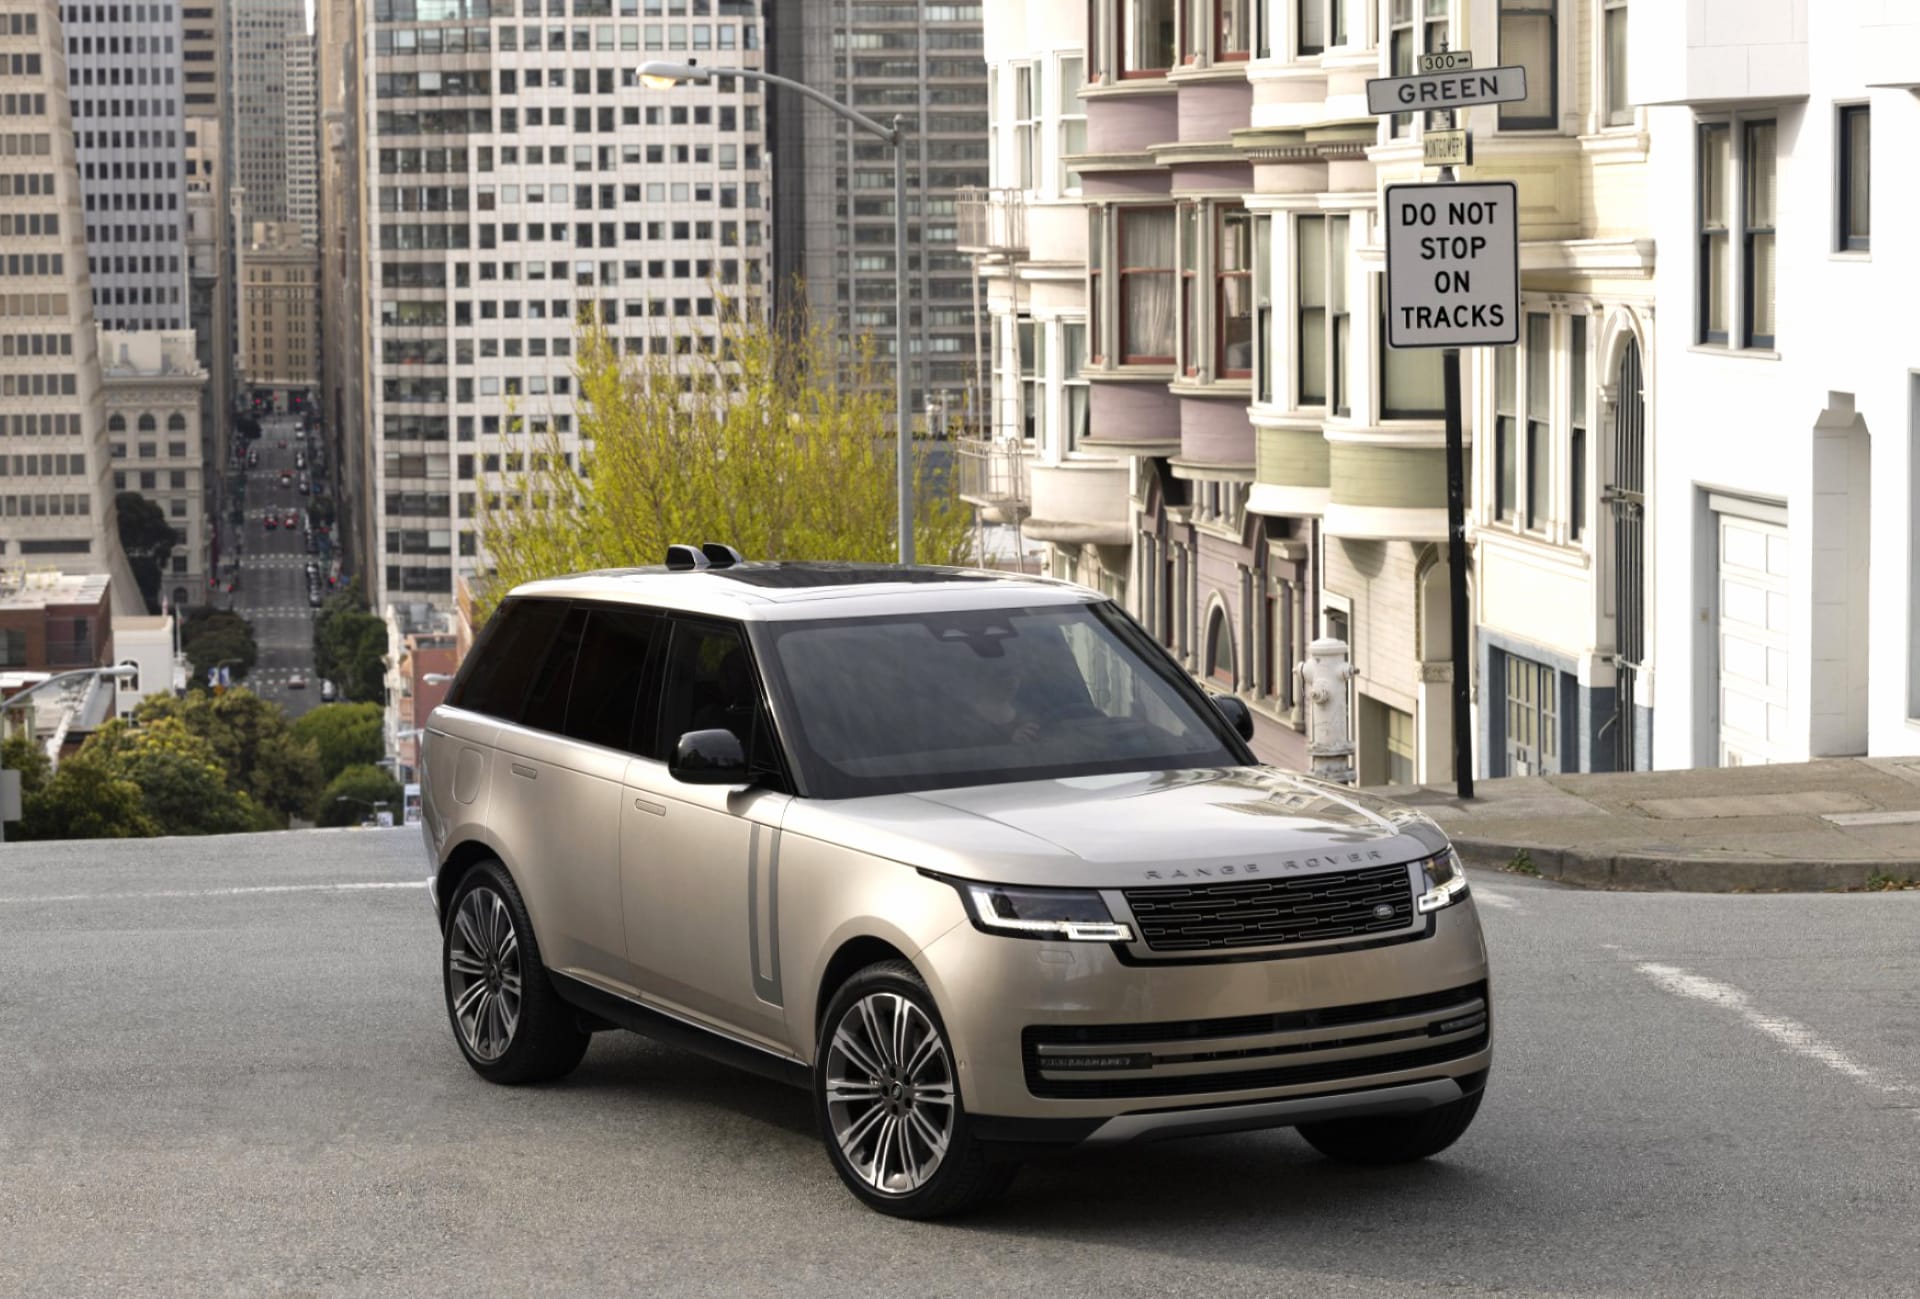 Range Rover HSE D350 wallpapers HD quality